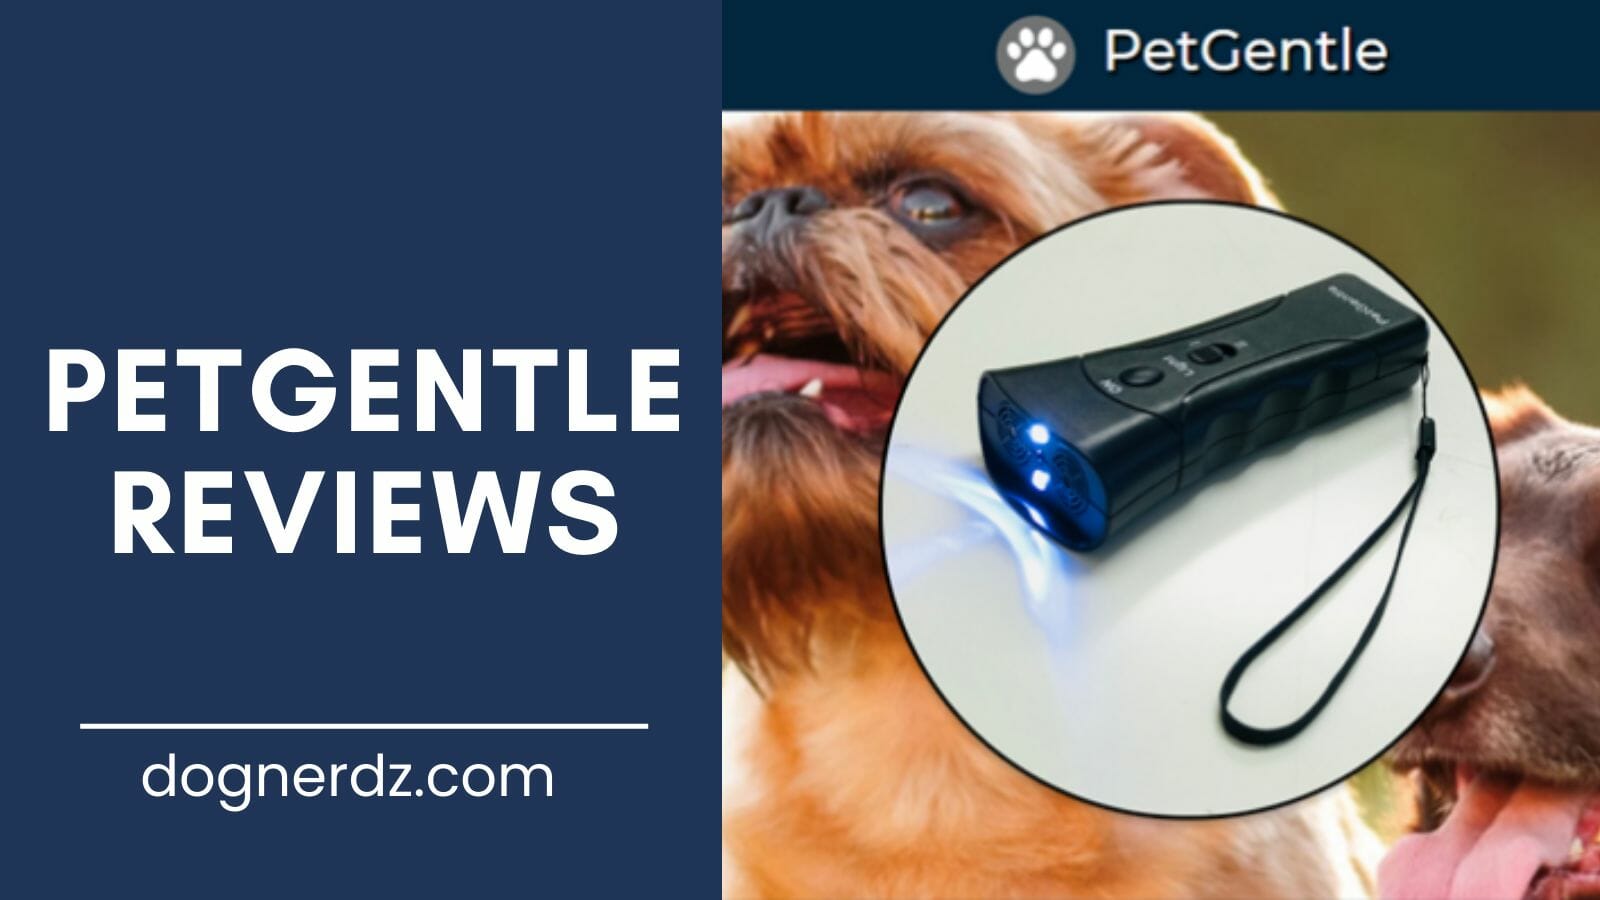 reviews of the best petgentle products